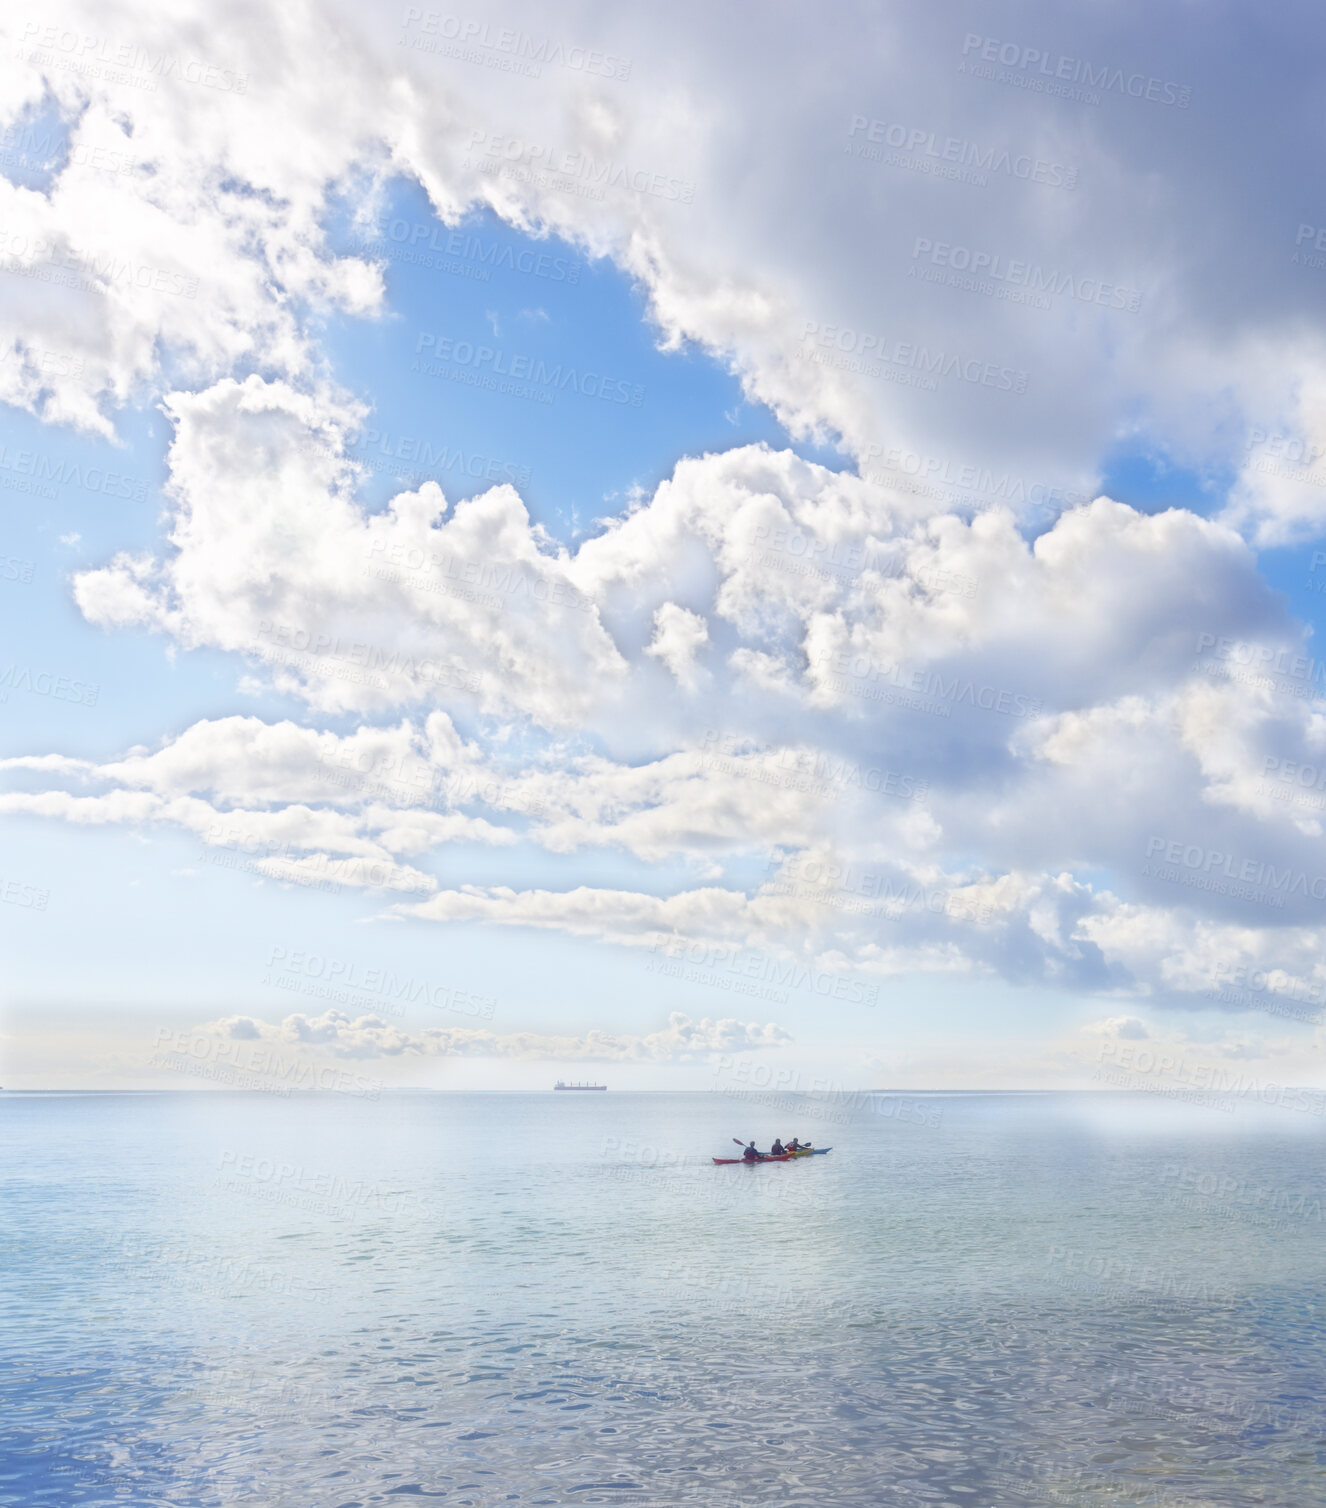 Buy stock photo Kayak, canoe or rowboat on a beautiful ocean, beach or sea with clouds in sky background outdoors. Scenic view of calm waves of water at a coast with relaxing, peaceful and bright landscape in nature